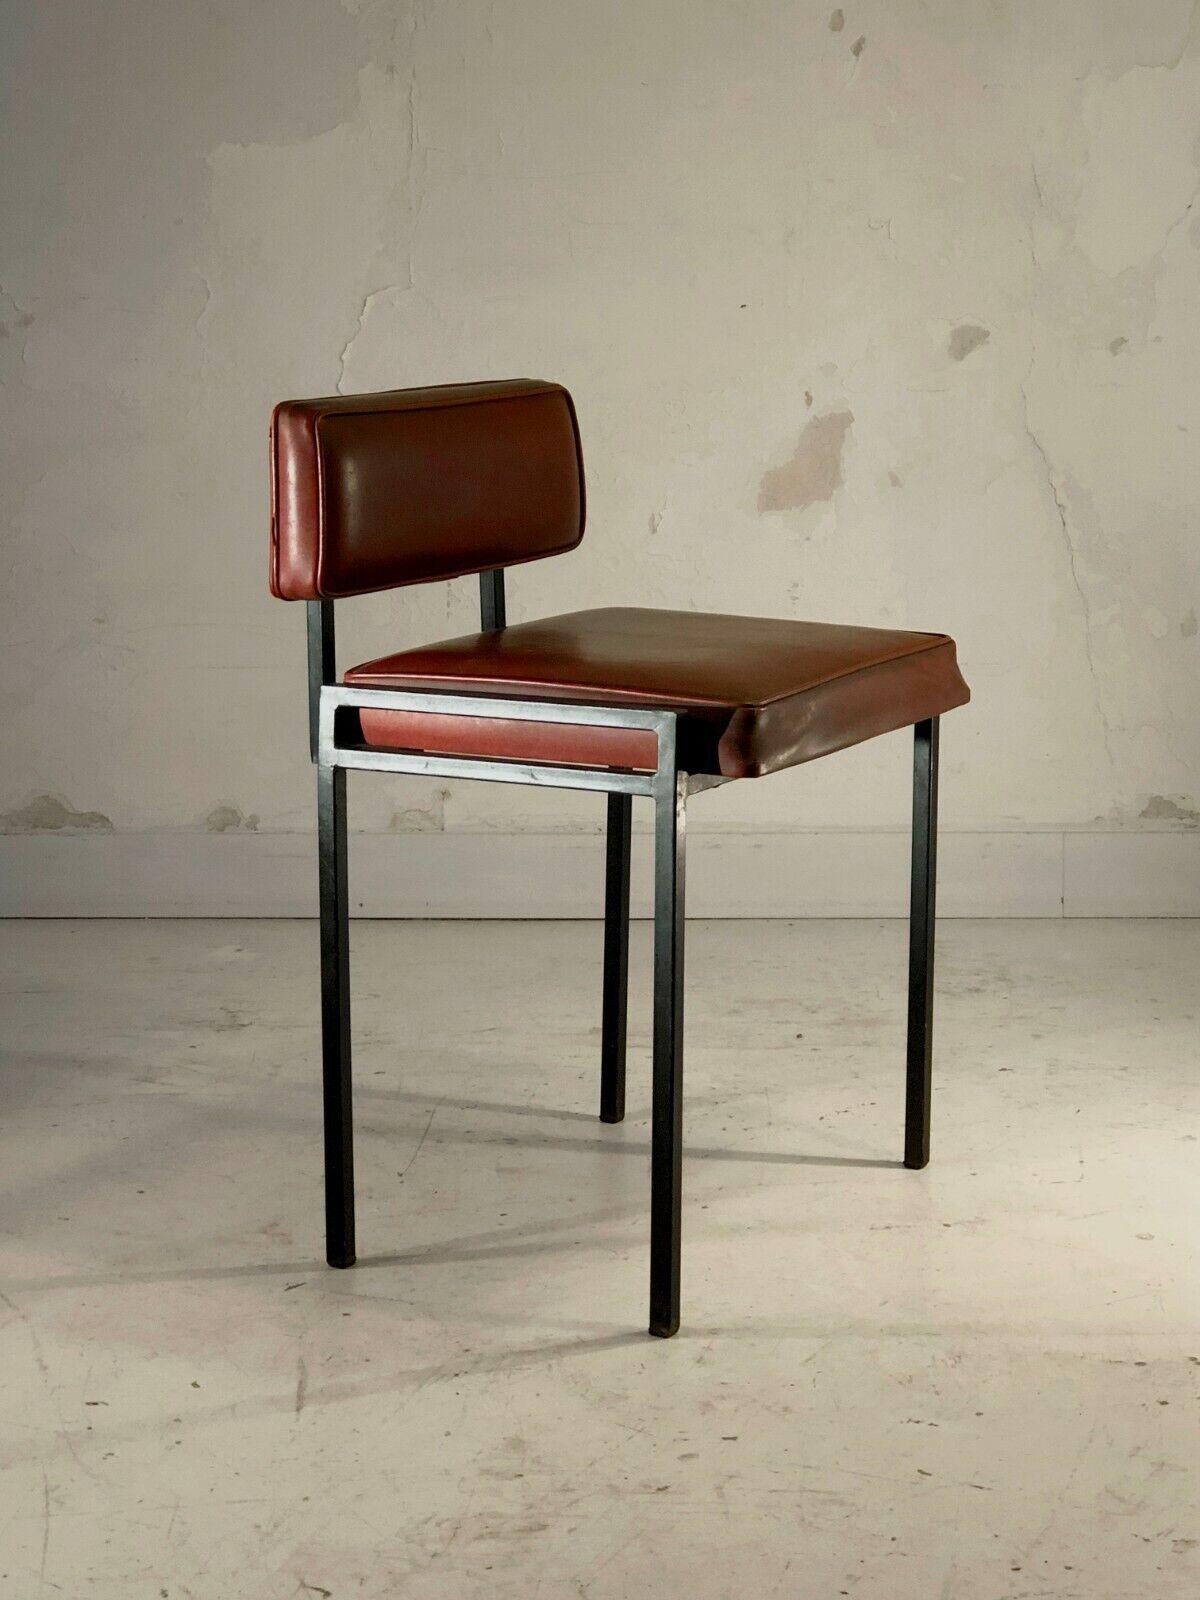 A rigorous Architectural, Modernist, Constructivist, Reconstruction chair, complex metal structure with black lacquered square section, seat in red imitation leather, in the spirit of the most radical french mid-century-modern creators such as